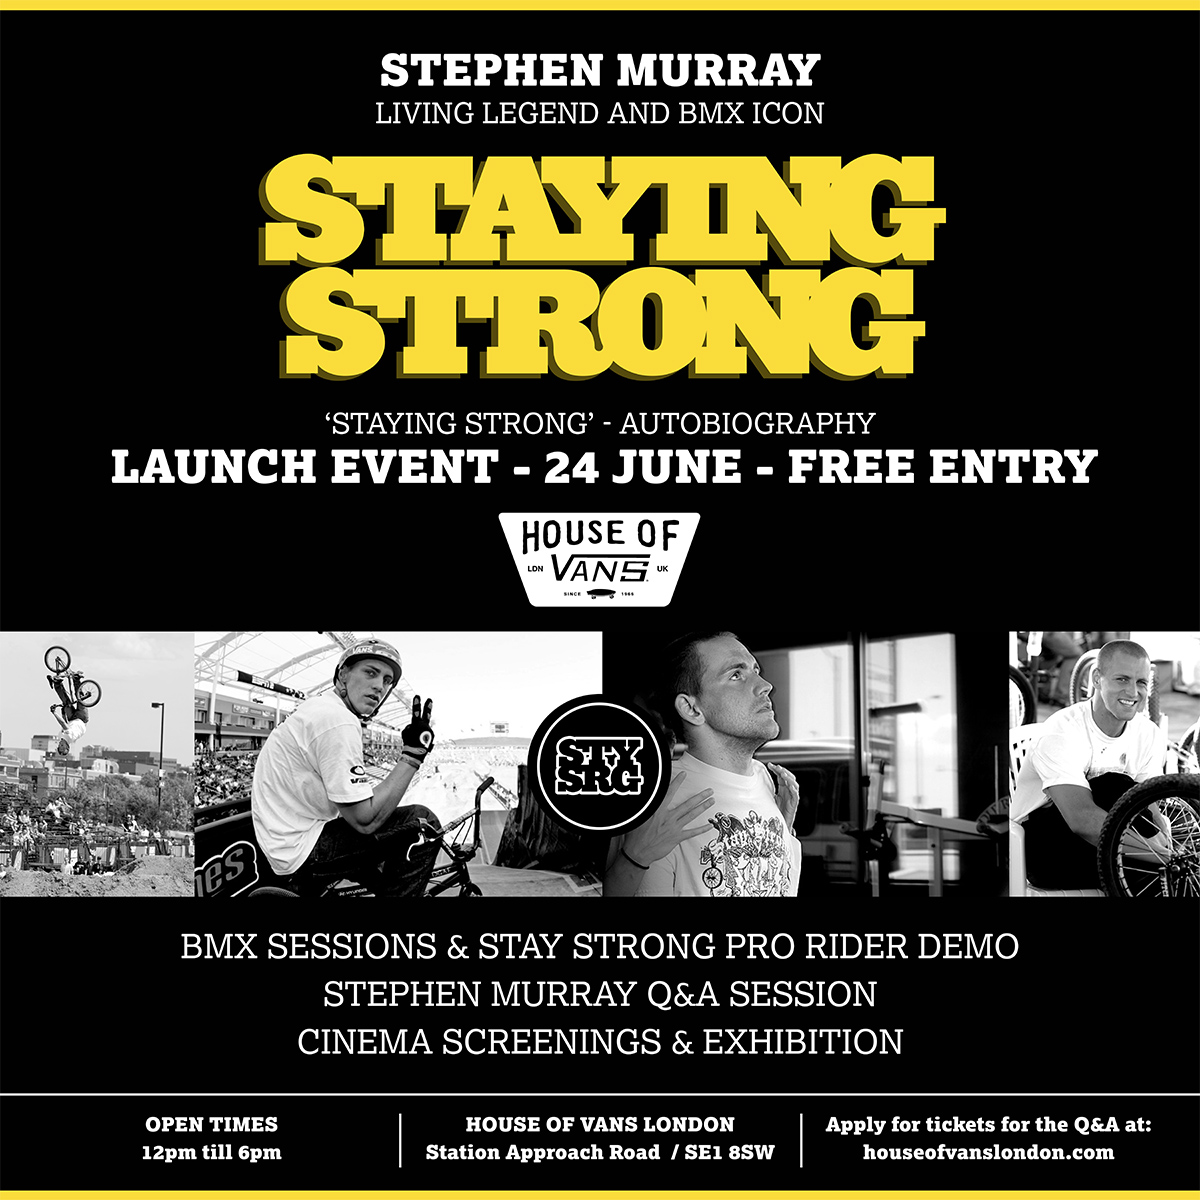 Staying Strong - Stephen Murray